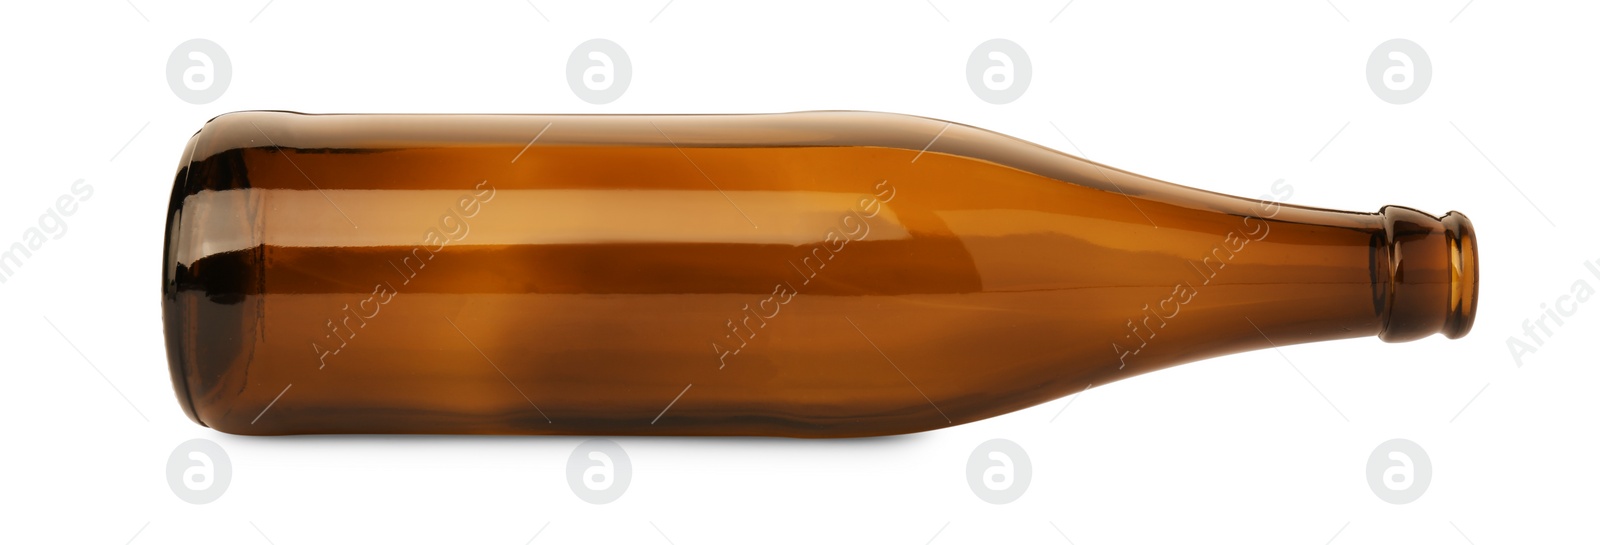 Photo of One empty brown beer bottle isolated on white